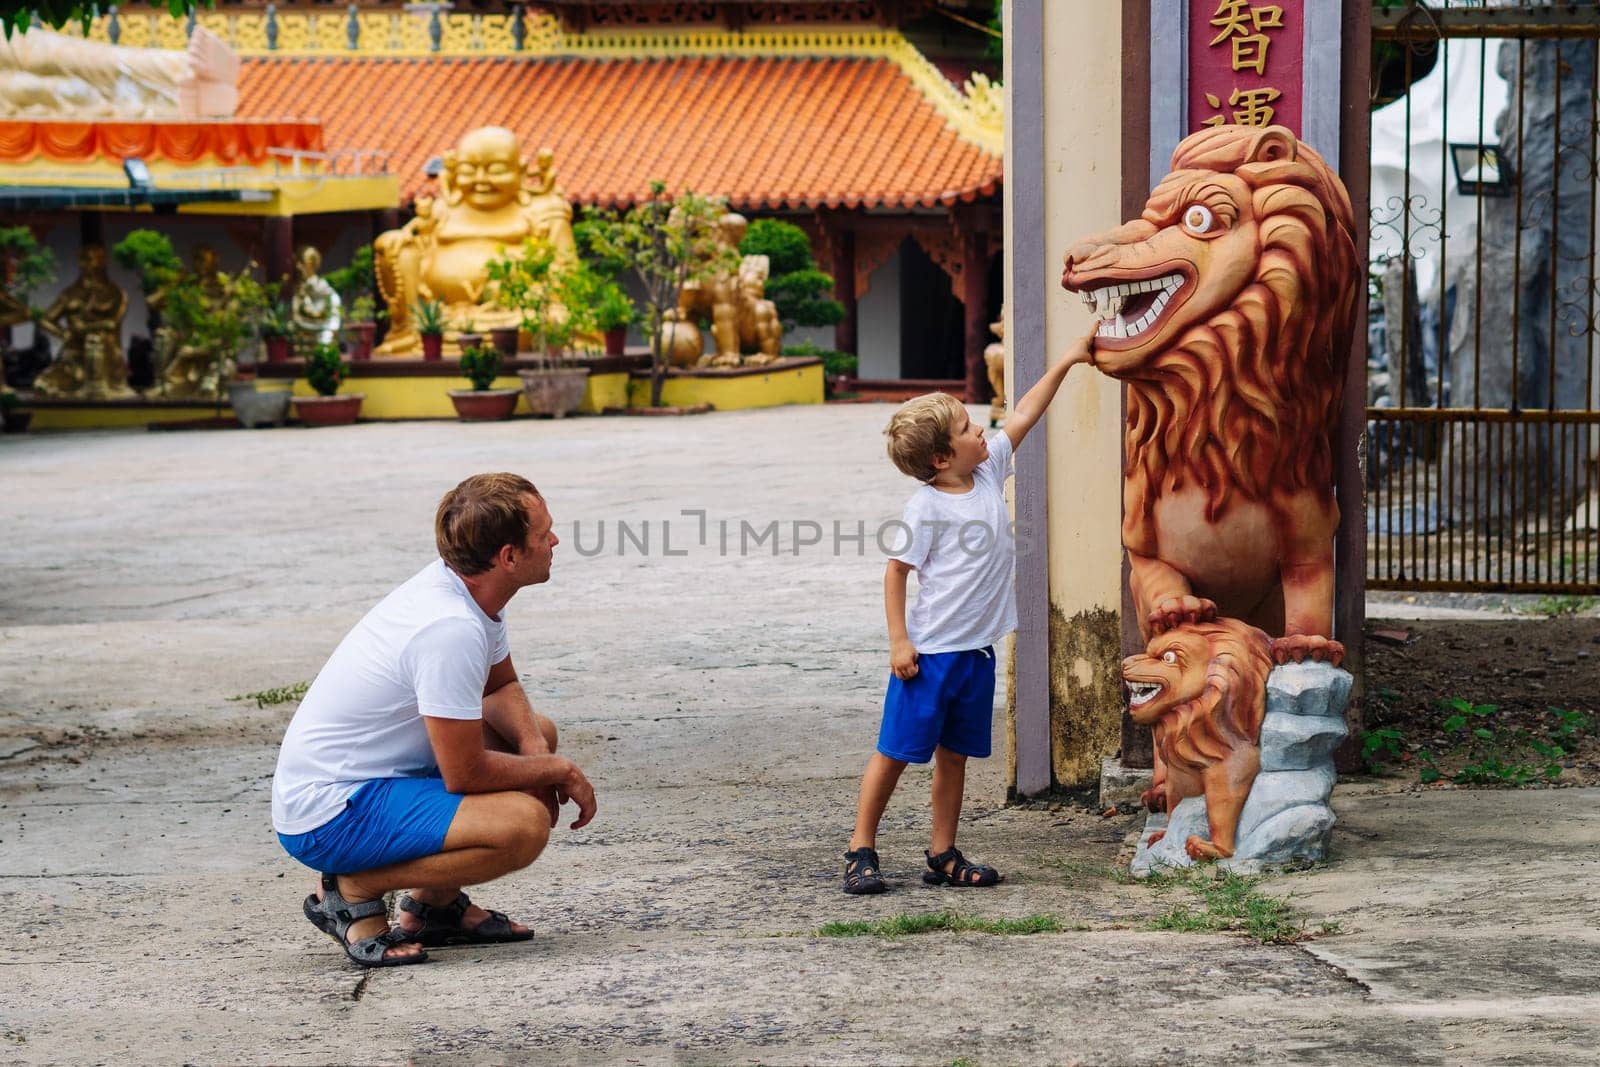 Father and son tourists walking in Vietnam Buddhist Temple, happy childhood, exploring world.